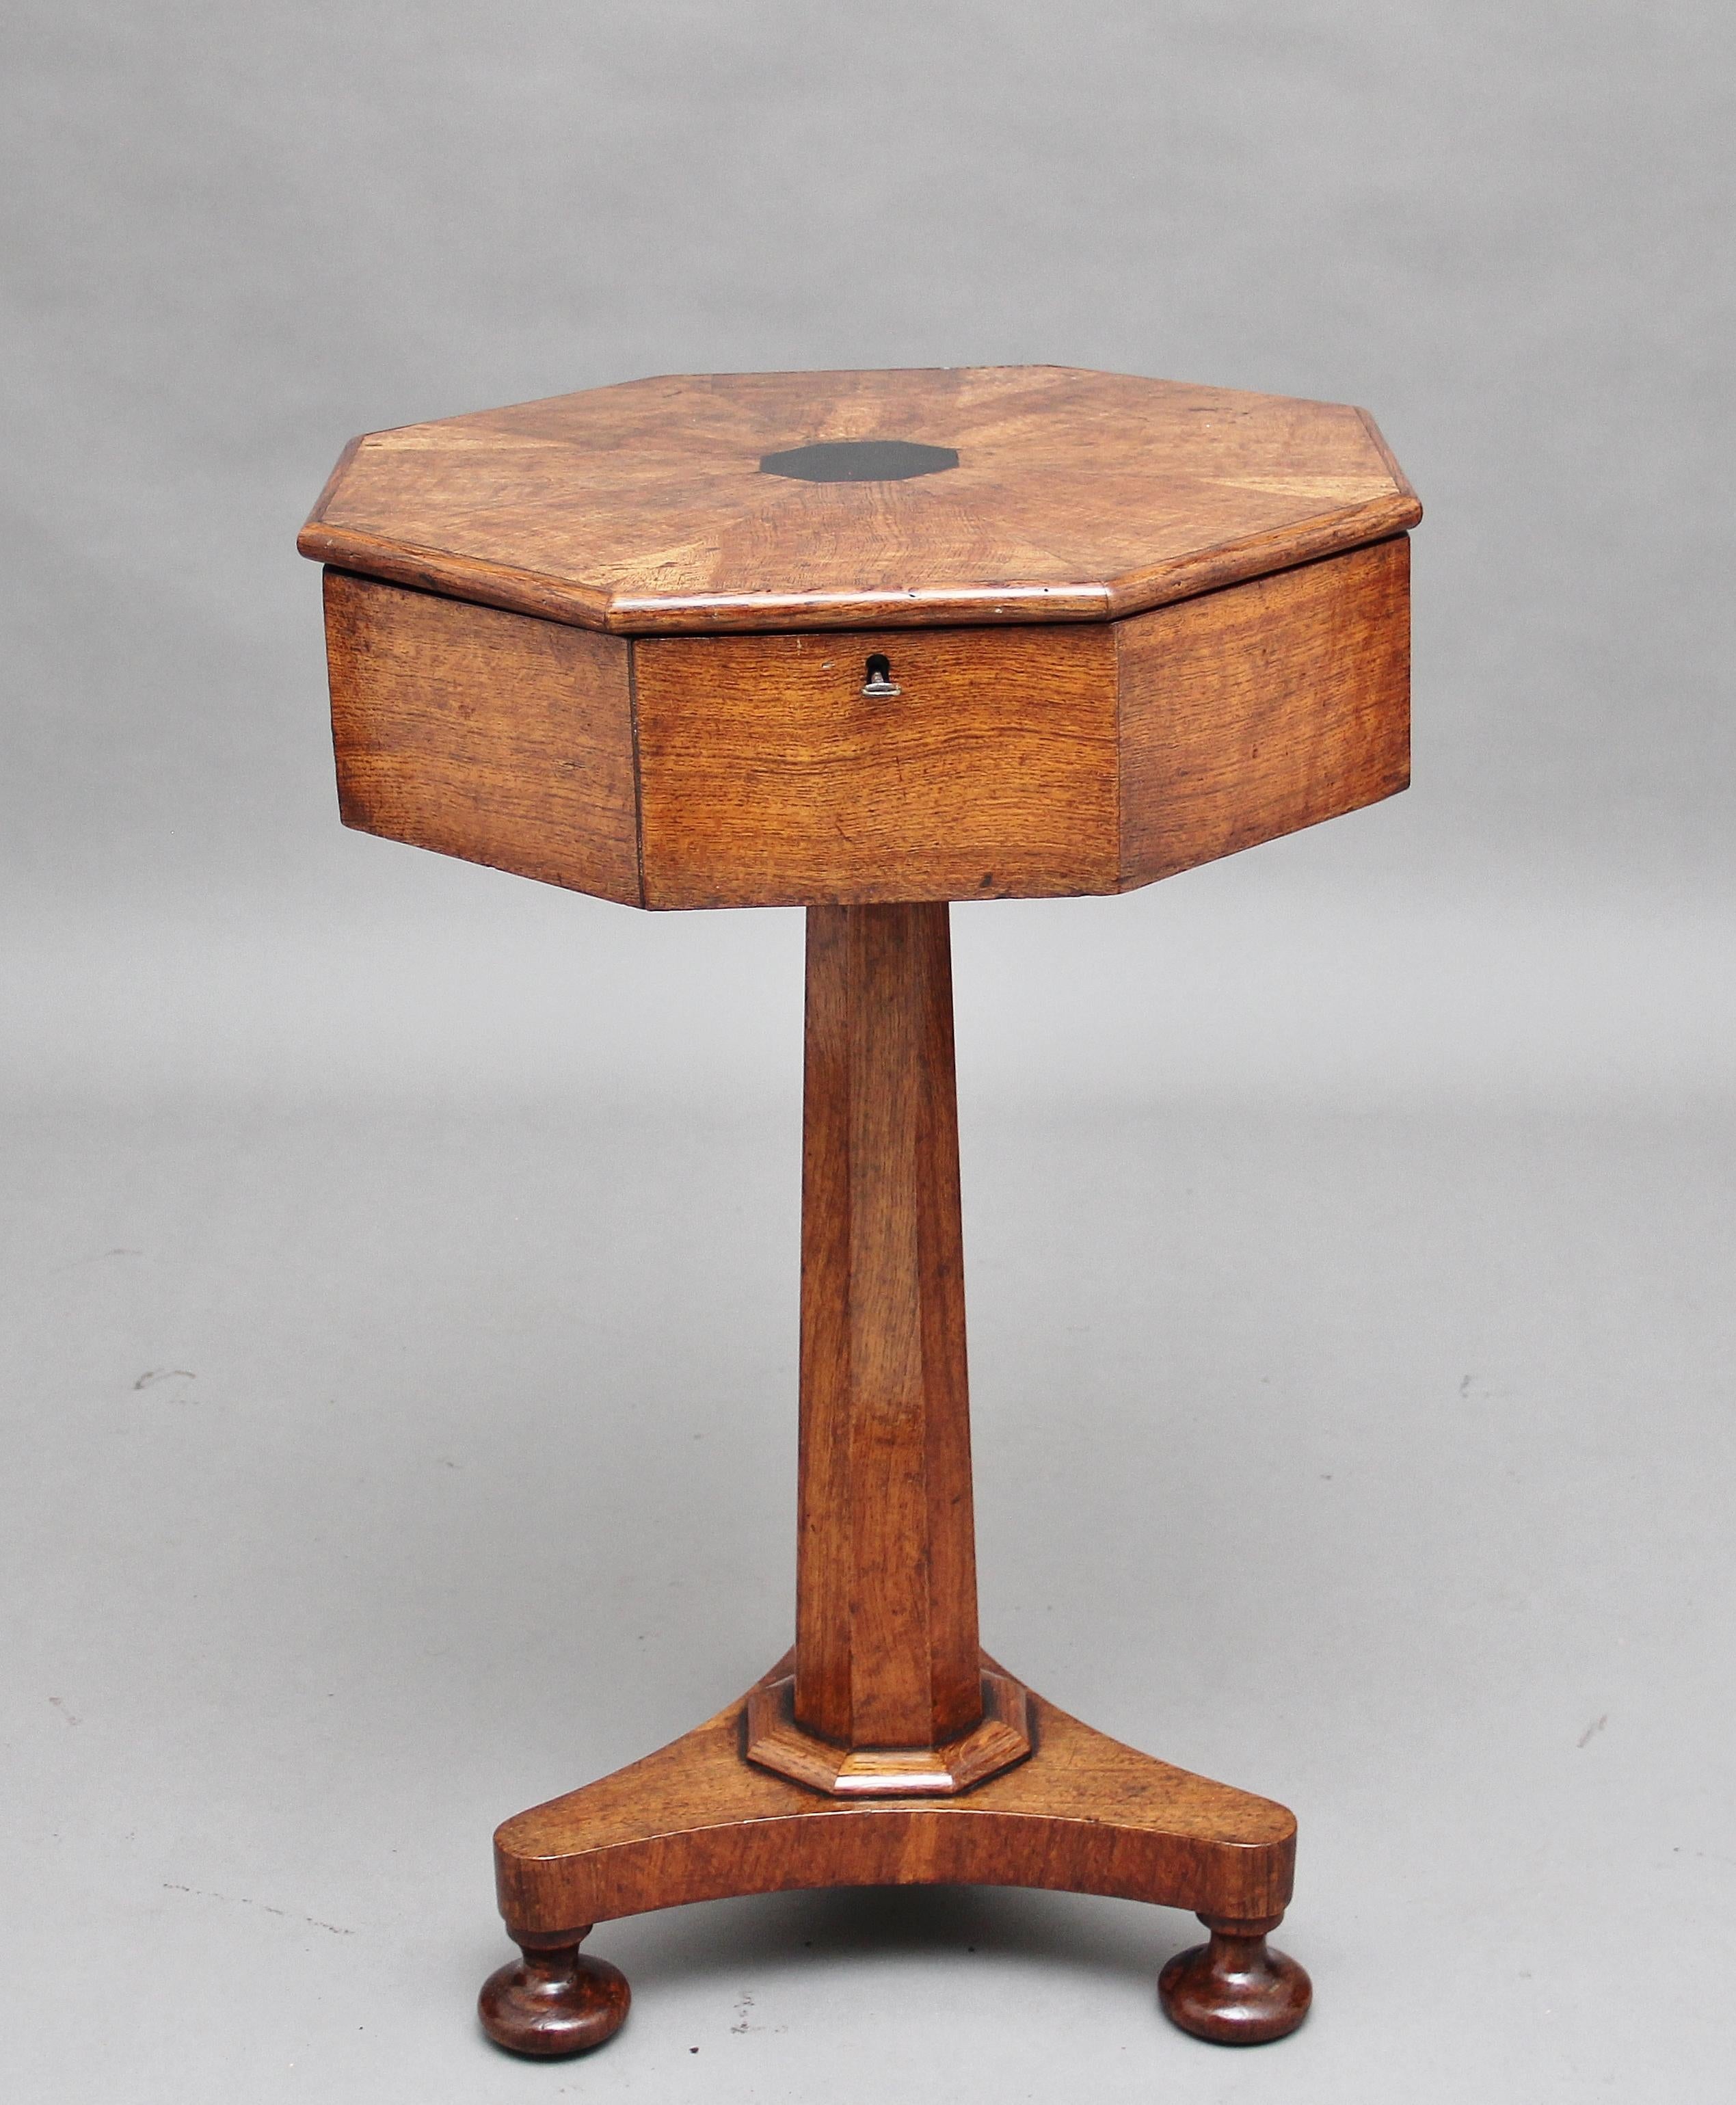 A lovely quality mid-19th century work table, the segmented octagonal shaped top having ebony inlay at the centre opening to reveal an assortment of various compartments, some with lift up lids, supported on a tapering octagonal shaped column